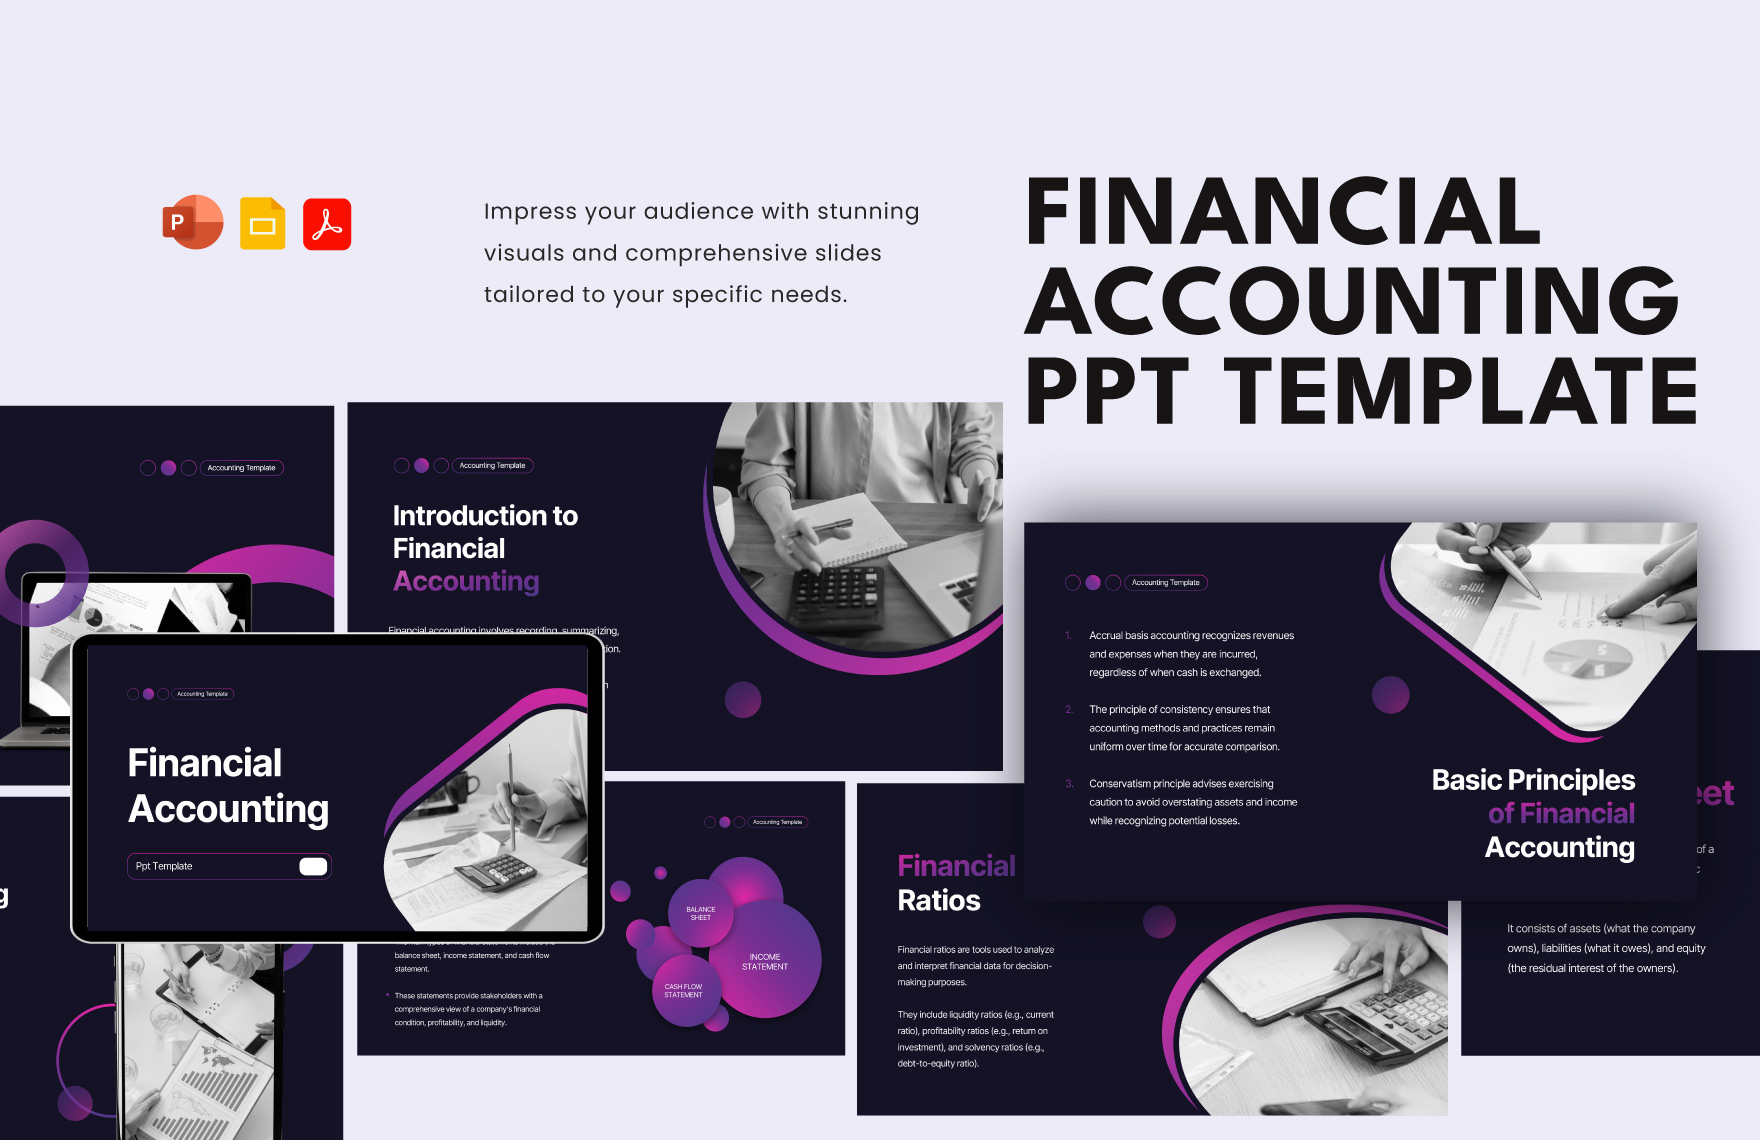 Financial Accounting PPT Template in PDF, PowerPoint, Google Slides